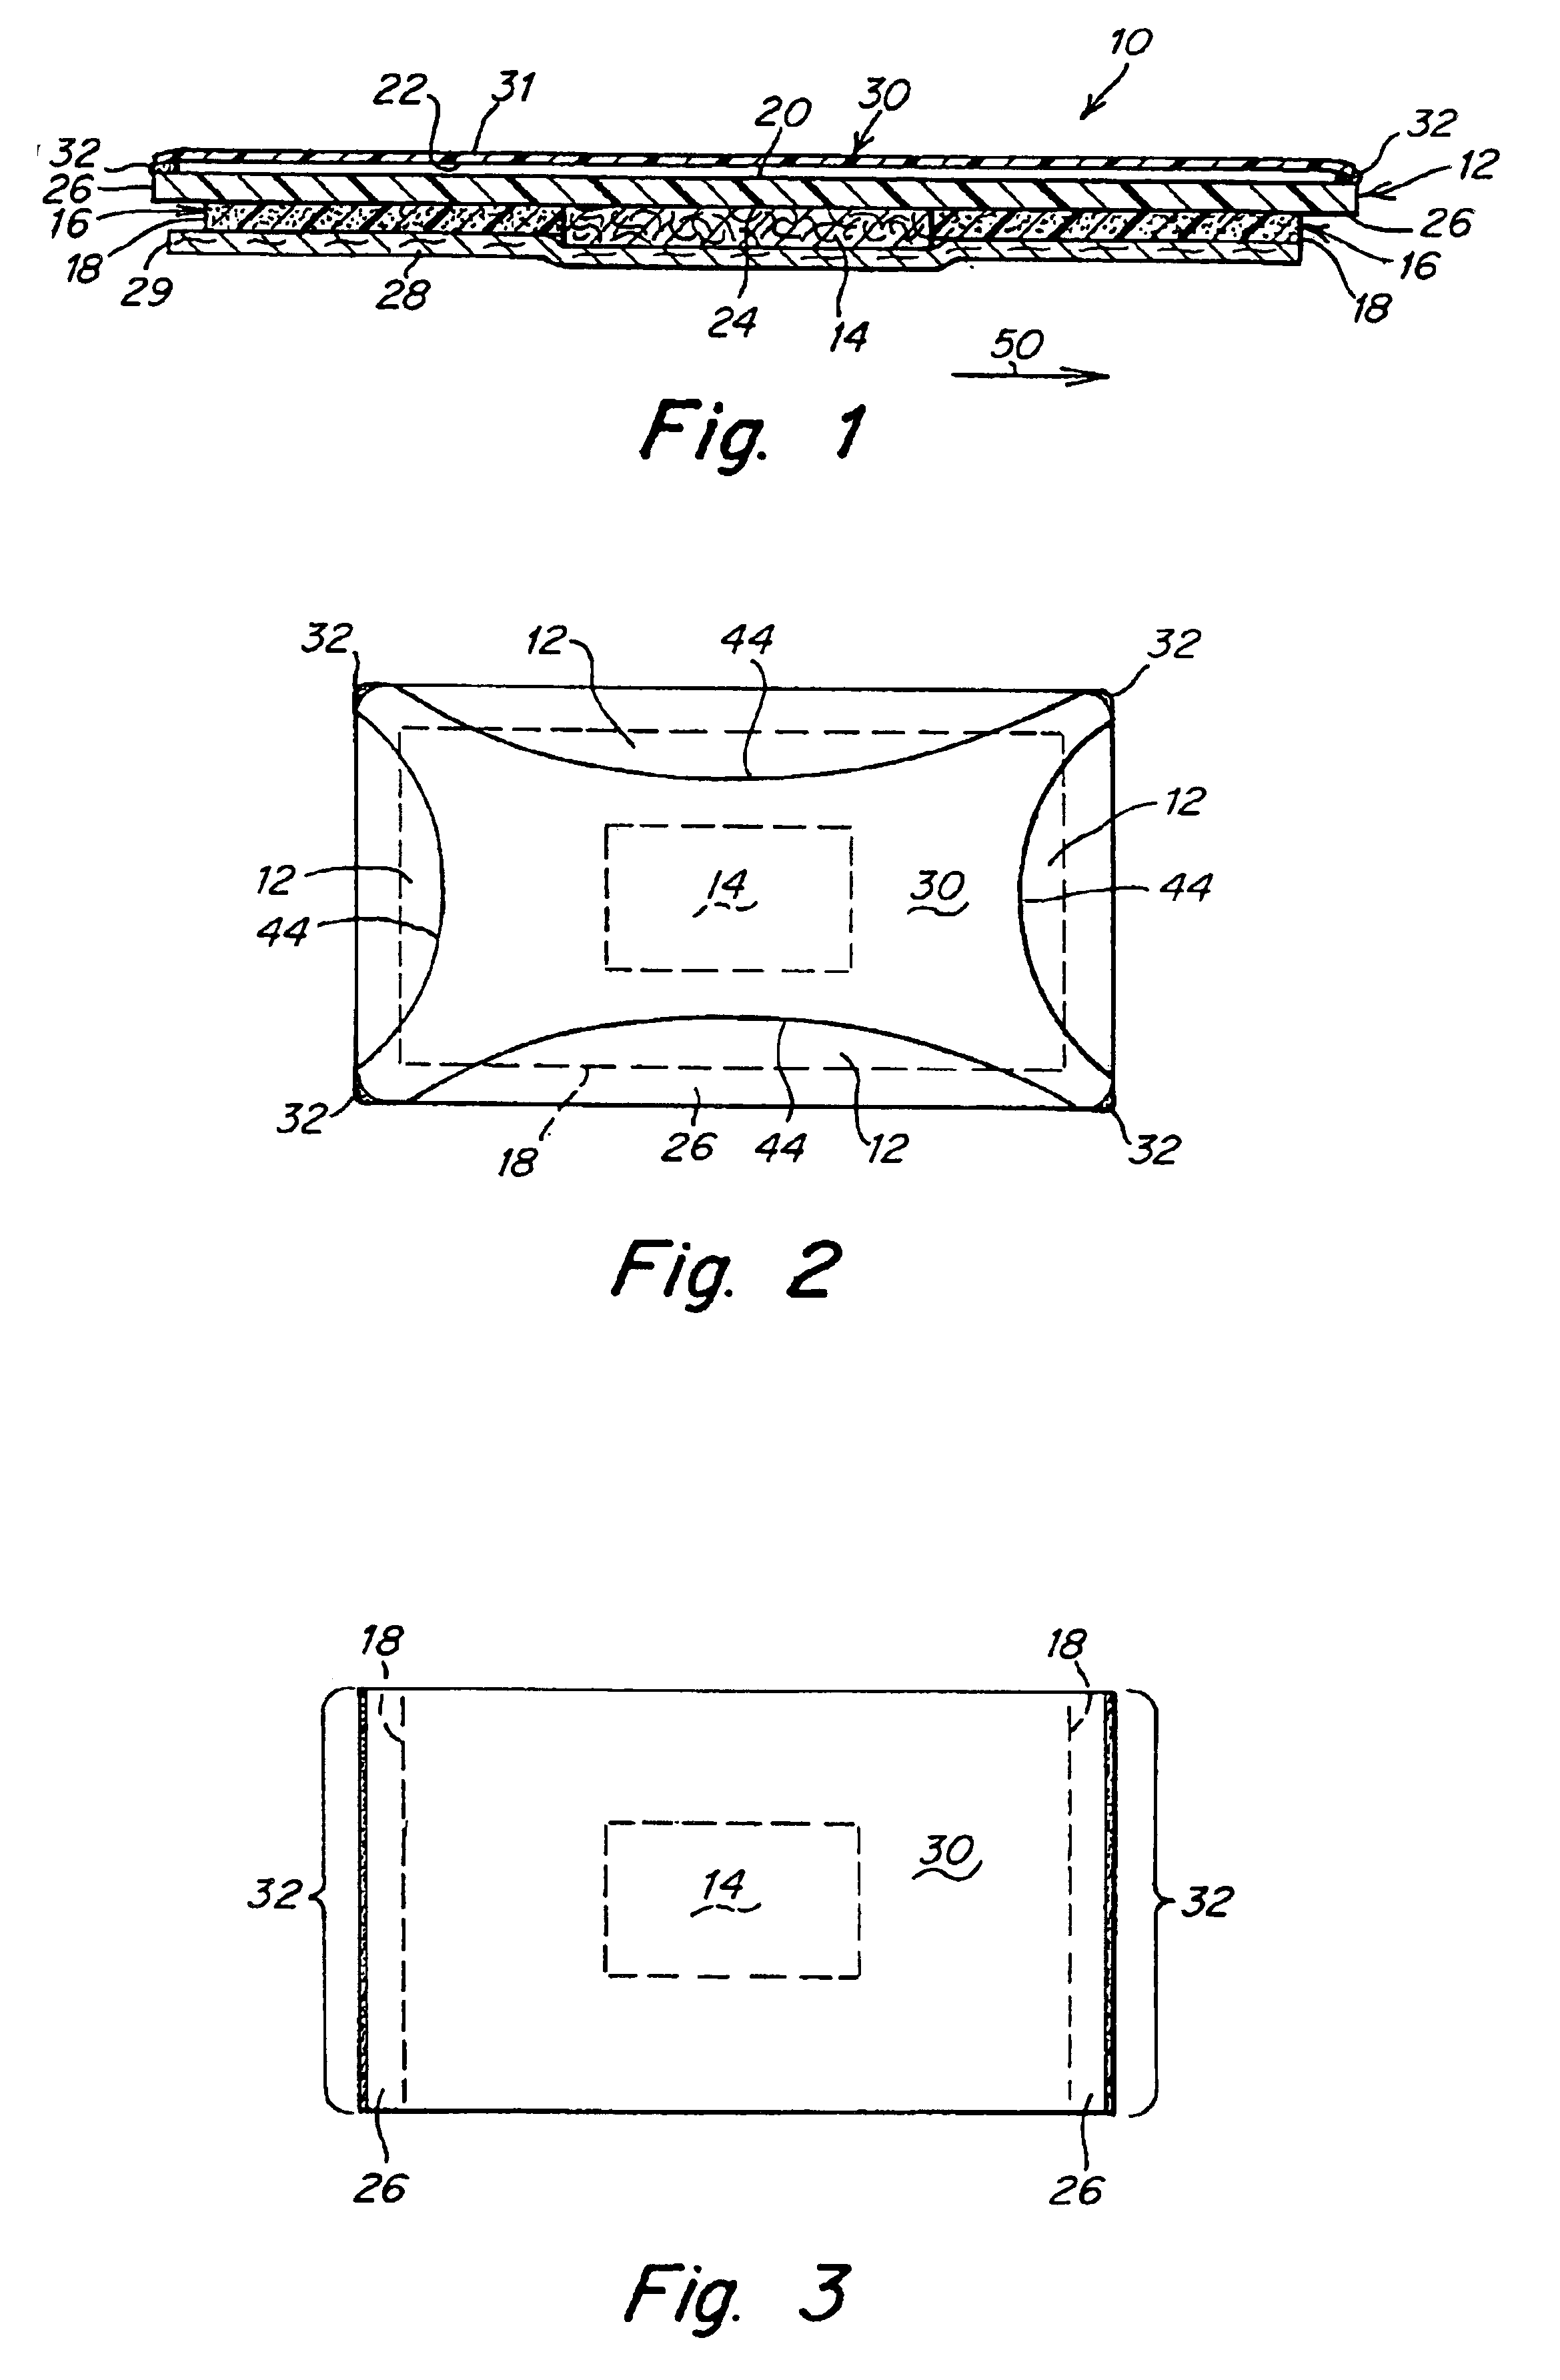 Adhesive bandage for protection of skin surfaces